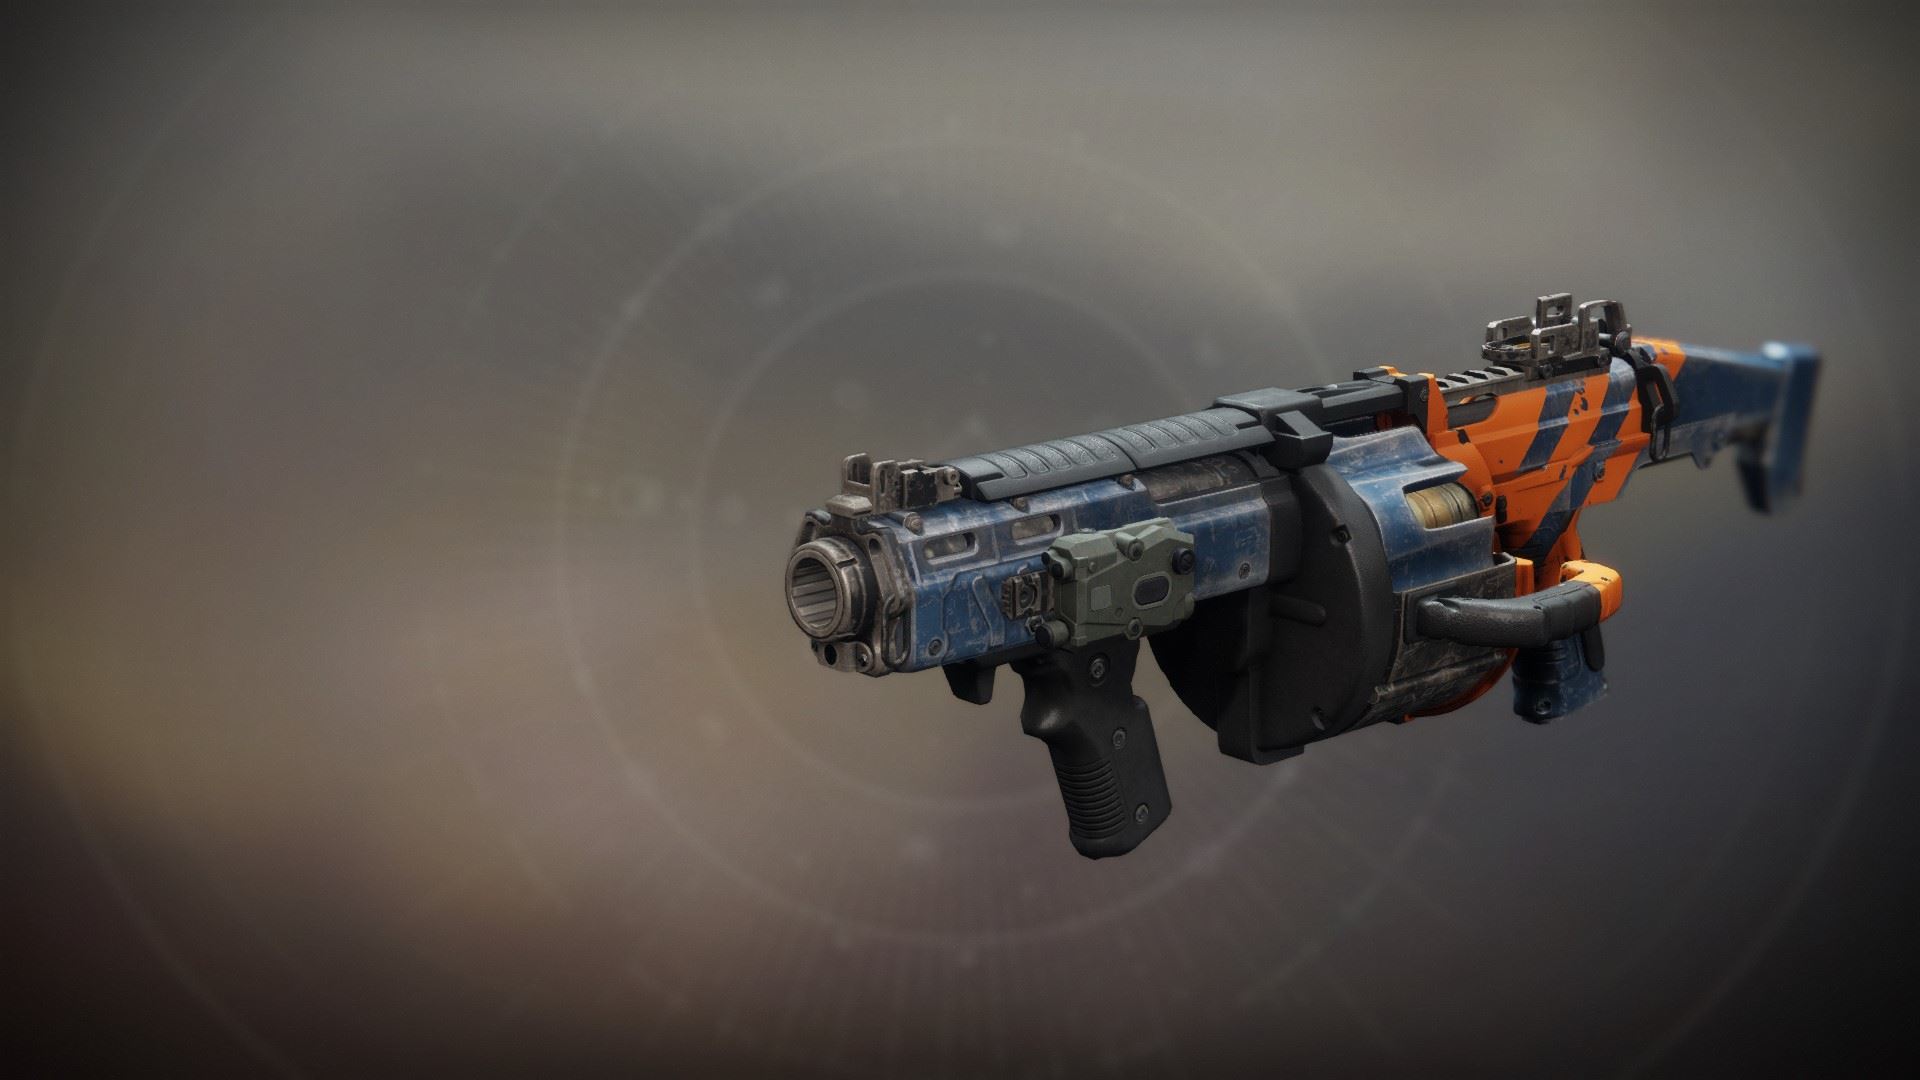 Outrageous Fortune - Item - Ishtar Collective - Destiny Lore by subject.